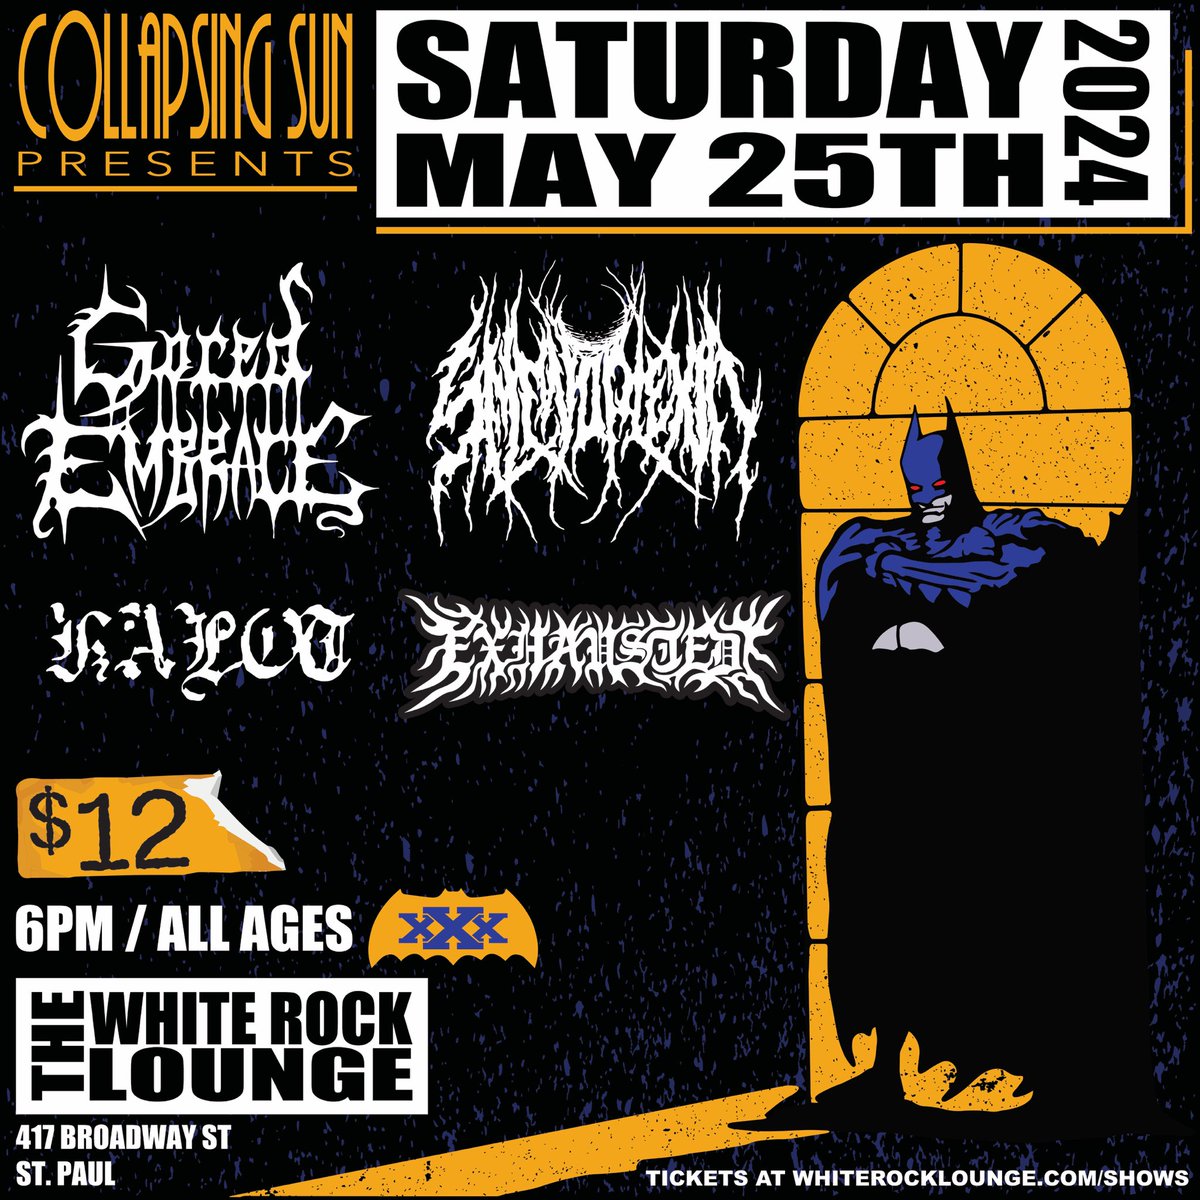 Saturday, May 25th at White Rock in St. Paul
@goredembracedm @selenoplexia312 Kalot & @Exhausted_tchc